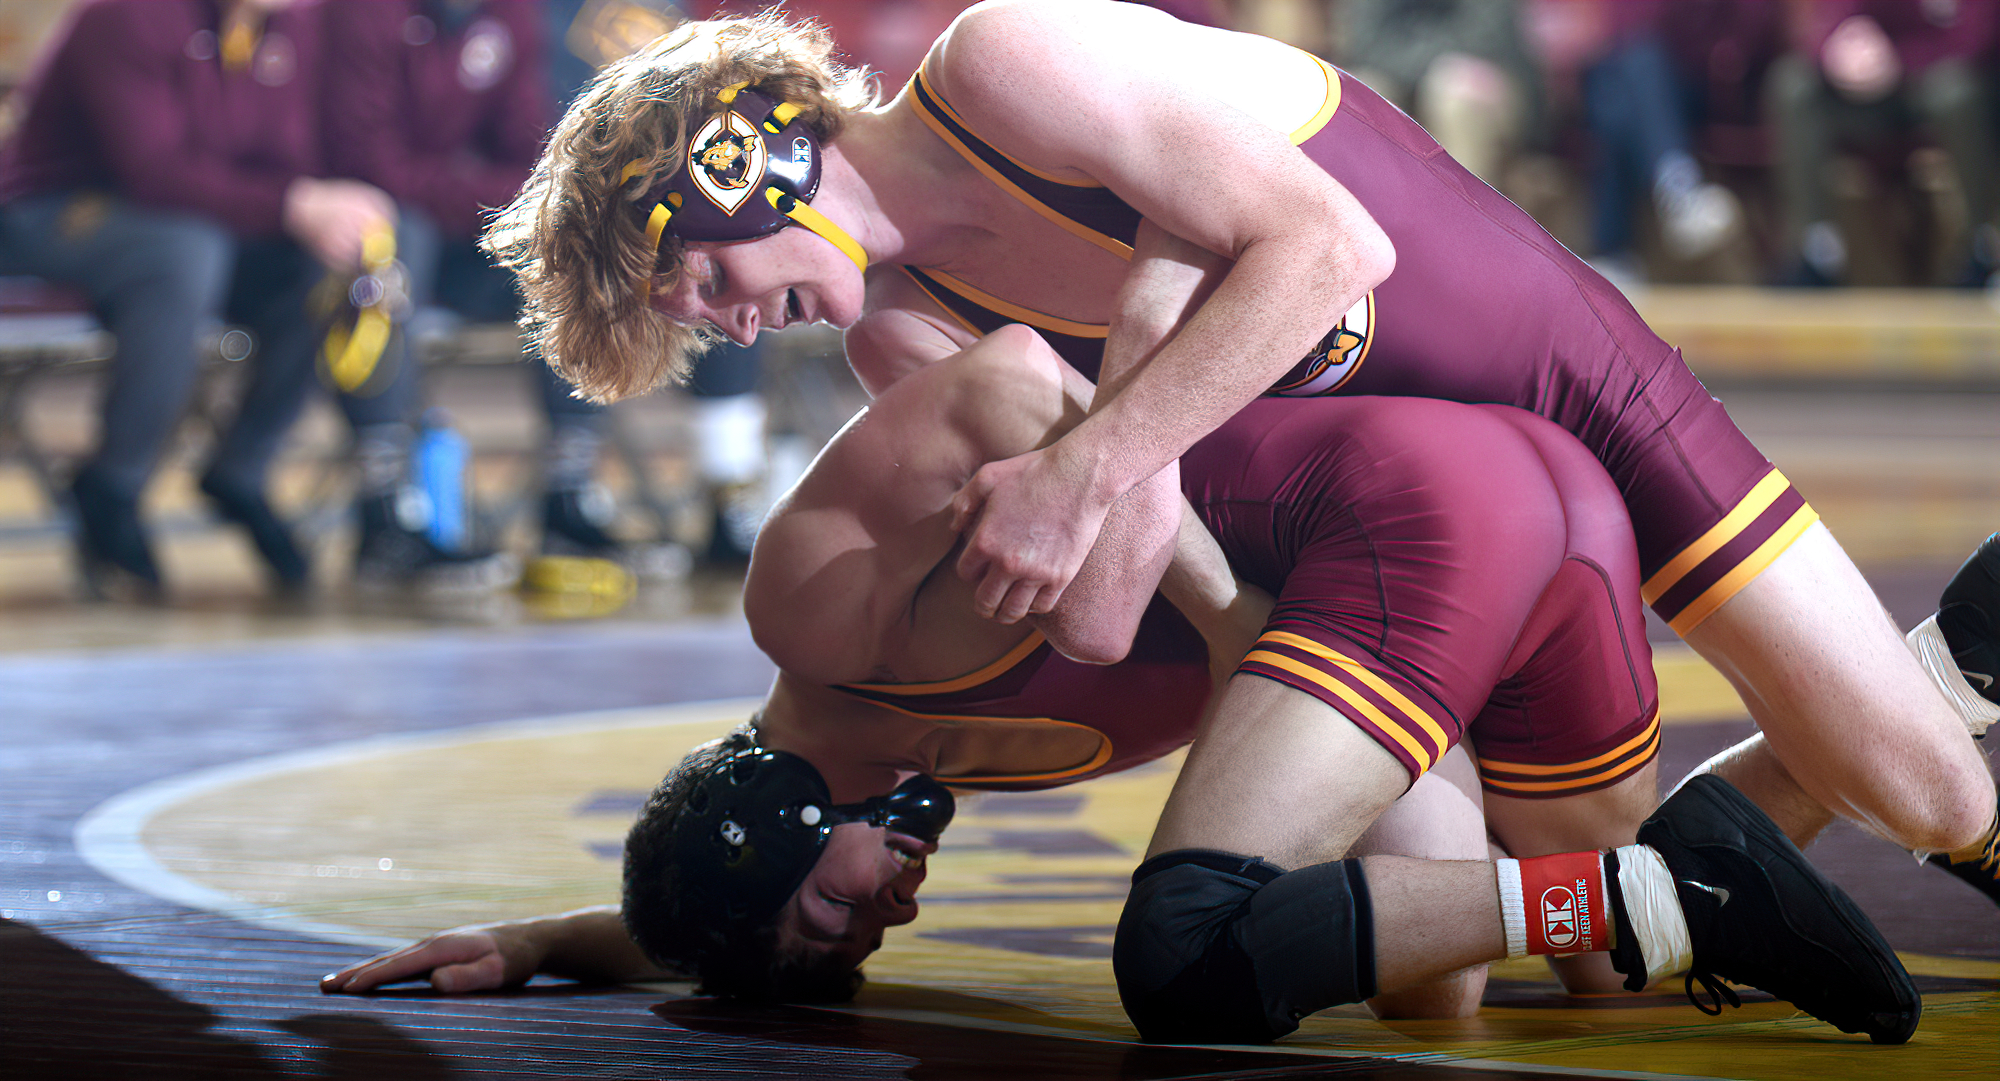 No.5-ranked Ty Bisek posted a pin in his match at 133 against Augsburg. Bisek has now won 15 straight matches and is 25-1 on the year.